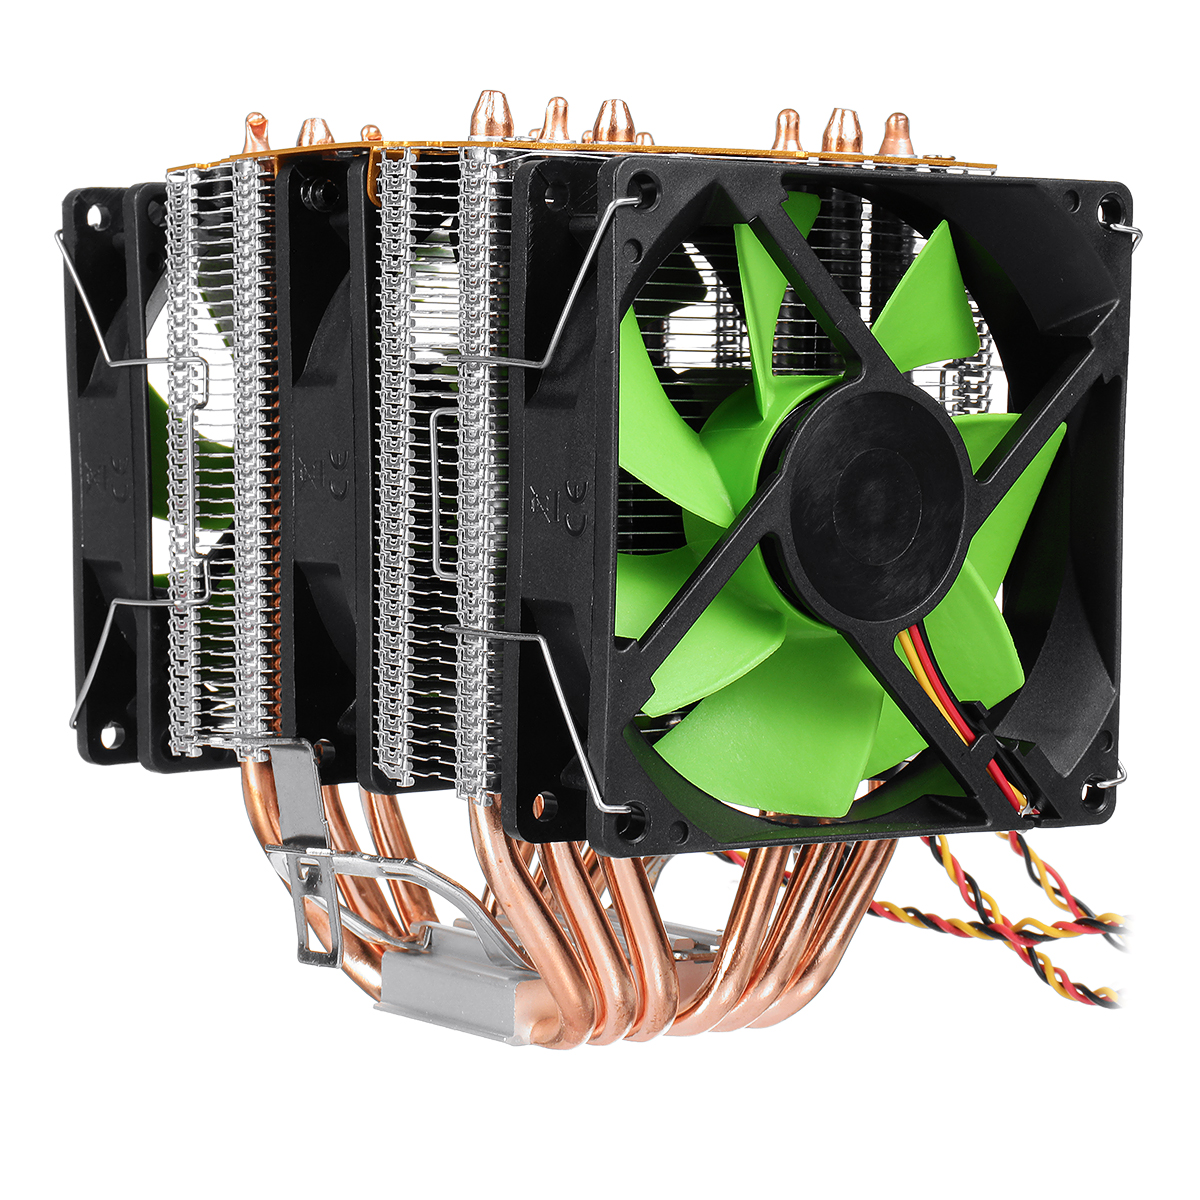 Find EVESKY CPU Cooling Fan 1/2/3 Fans 3/4 Pin 6 Heat Pipes RGB/Without Light Silent Computer Case Cooler CPU Heatsink for Intel AMD CPU for Sale on Gipsybee.com with cryptocurrencies